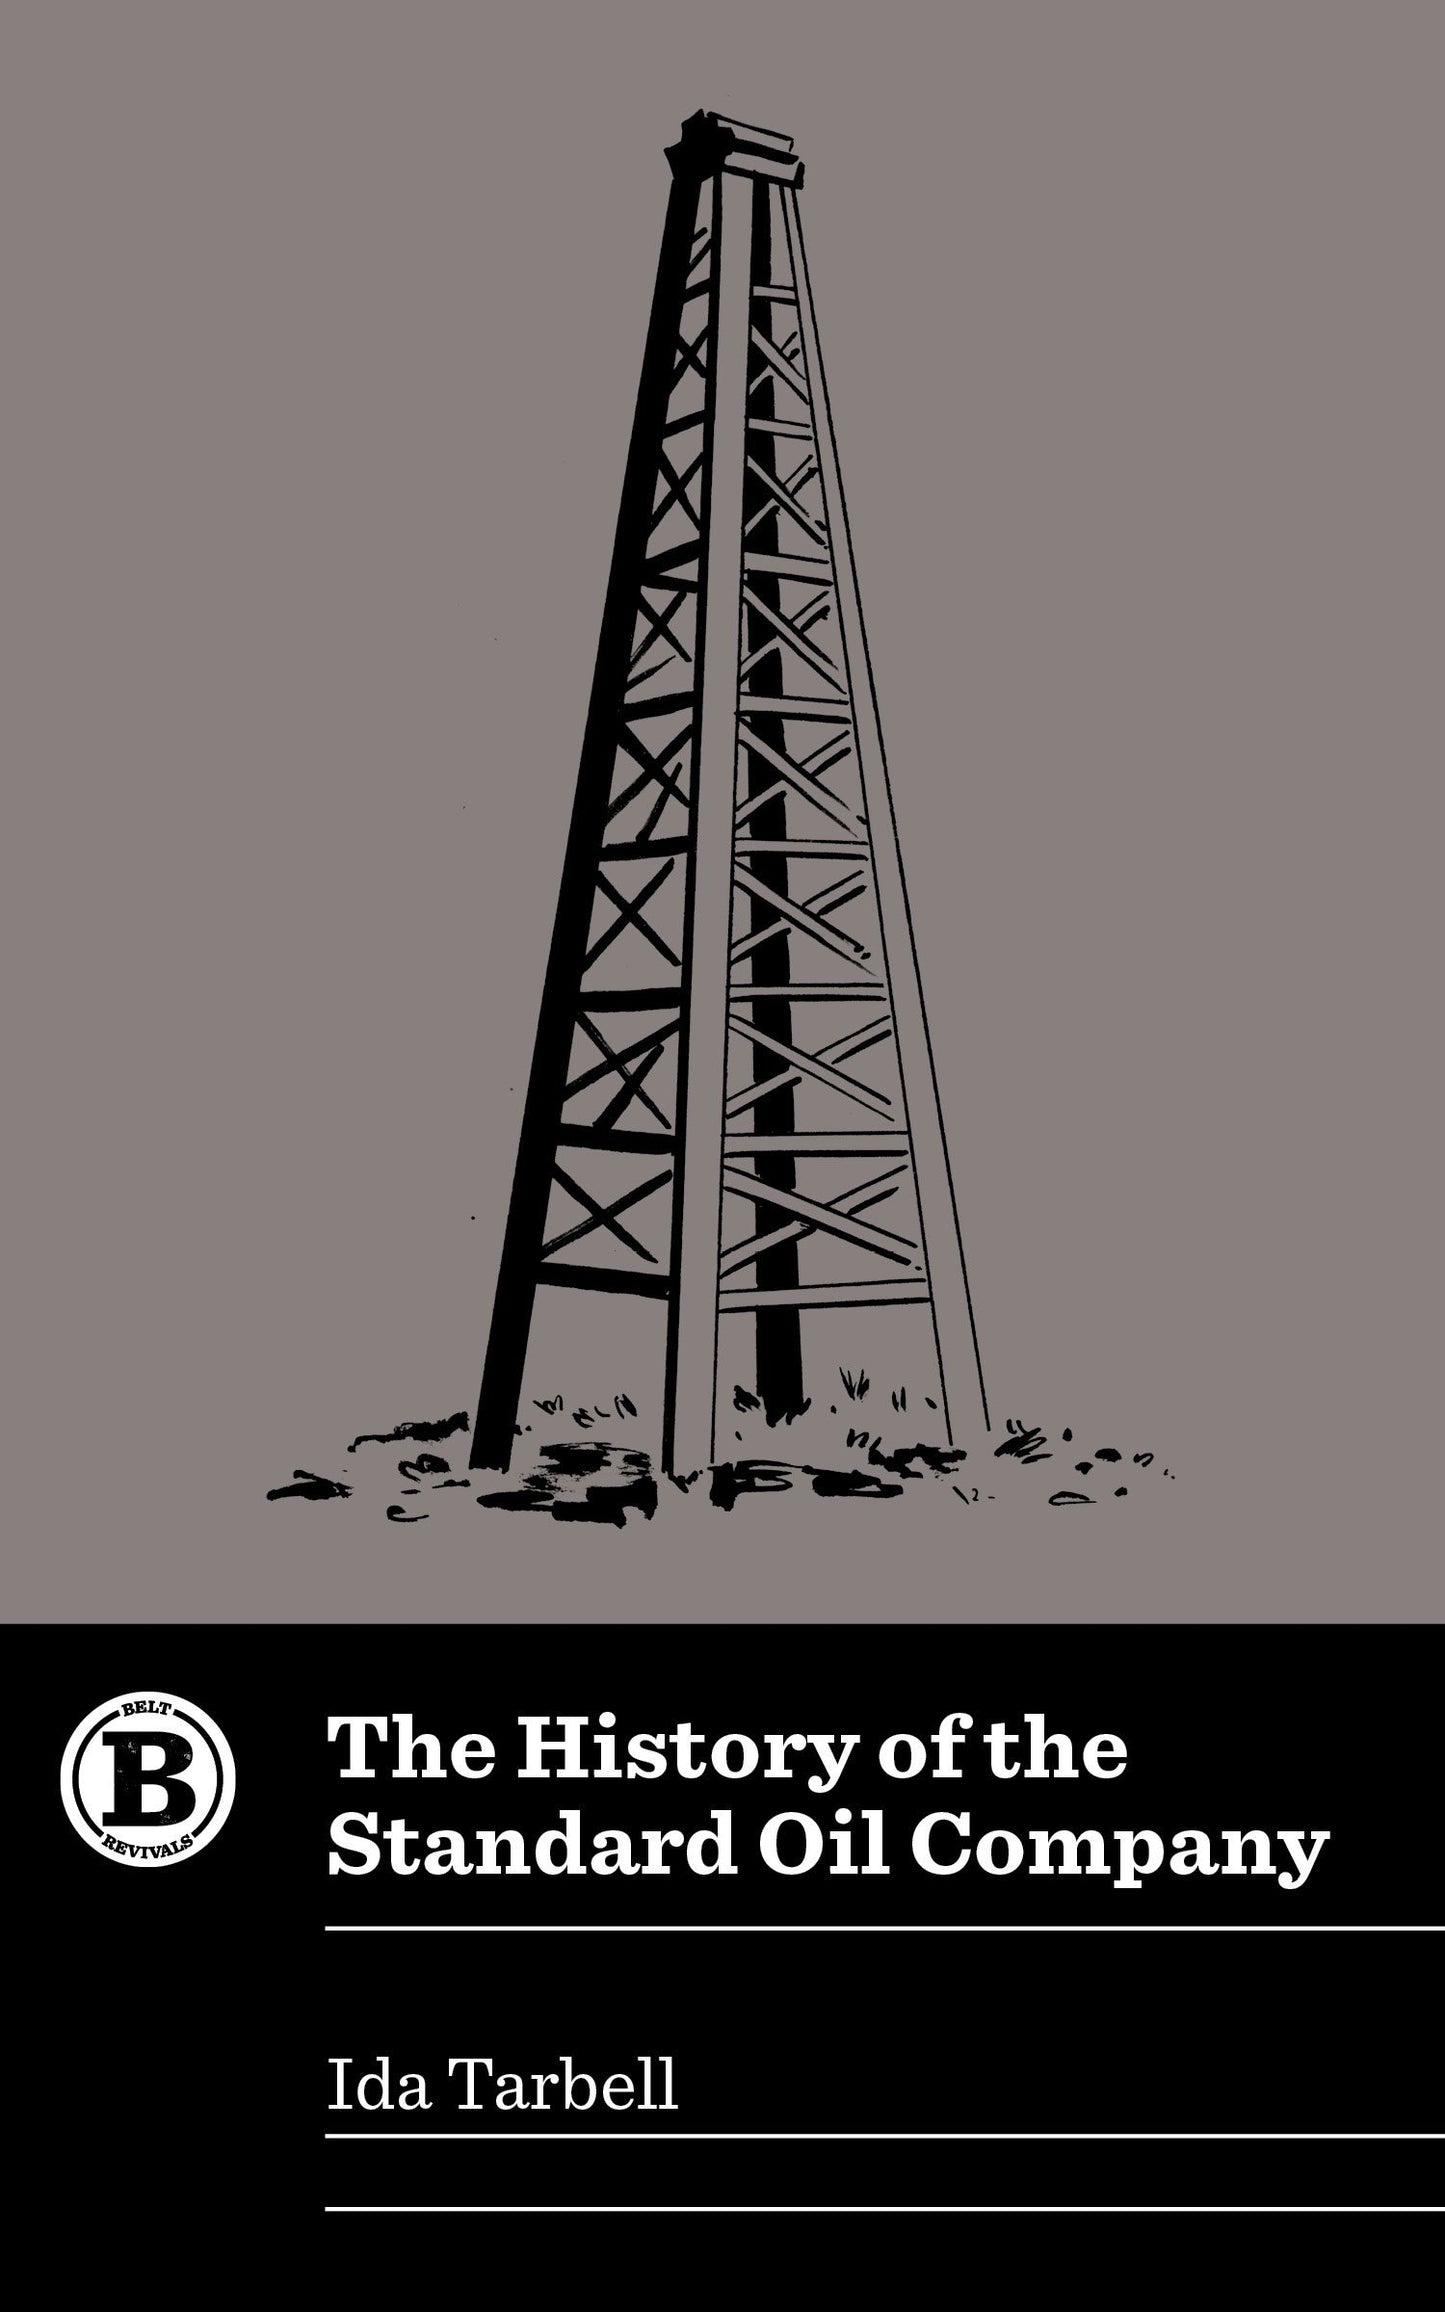 The History of the Standard Oil Company by Ida Tarbell - Belt Publishing